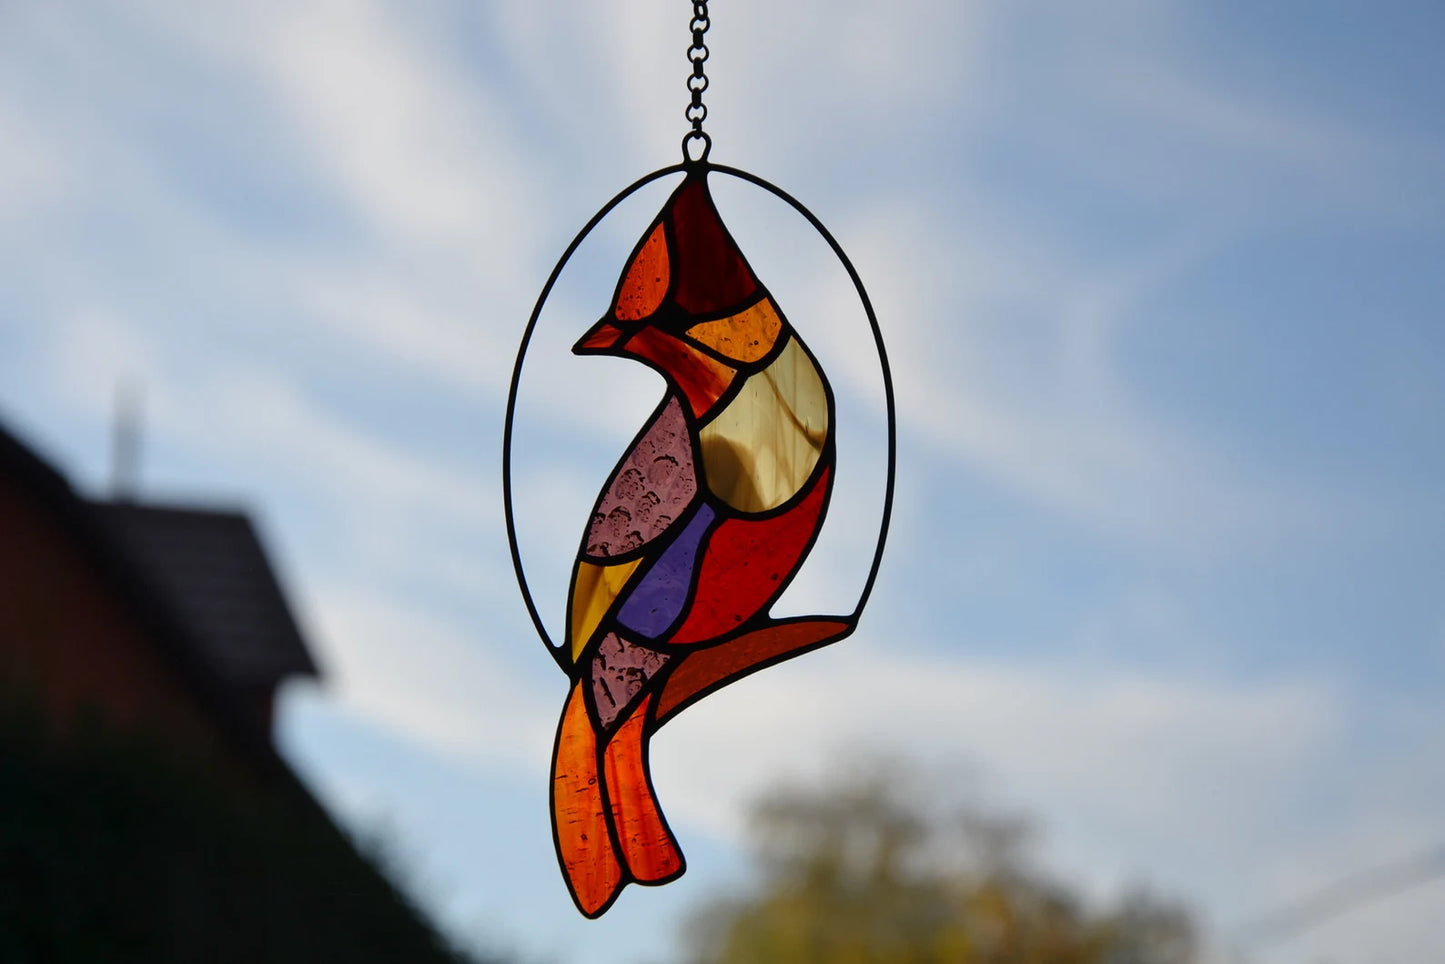 Stained glass suncatcher Bird stain glass gift Window hanging panel Tiffany style glass Garden decor Wall hanging Stain glass pendant